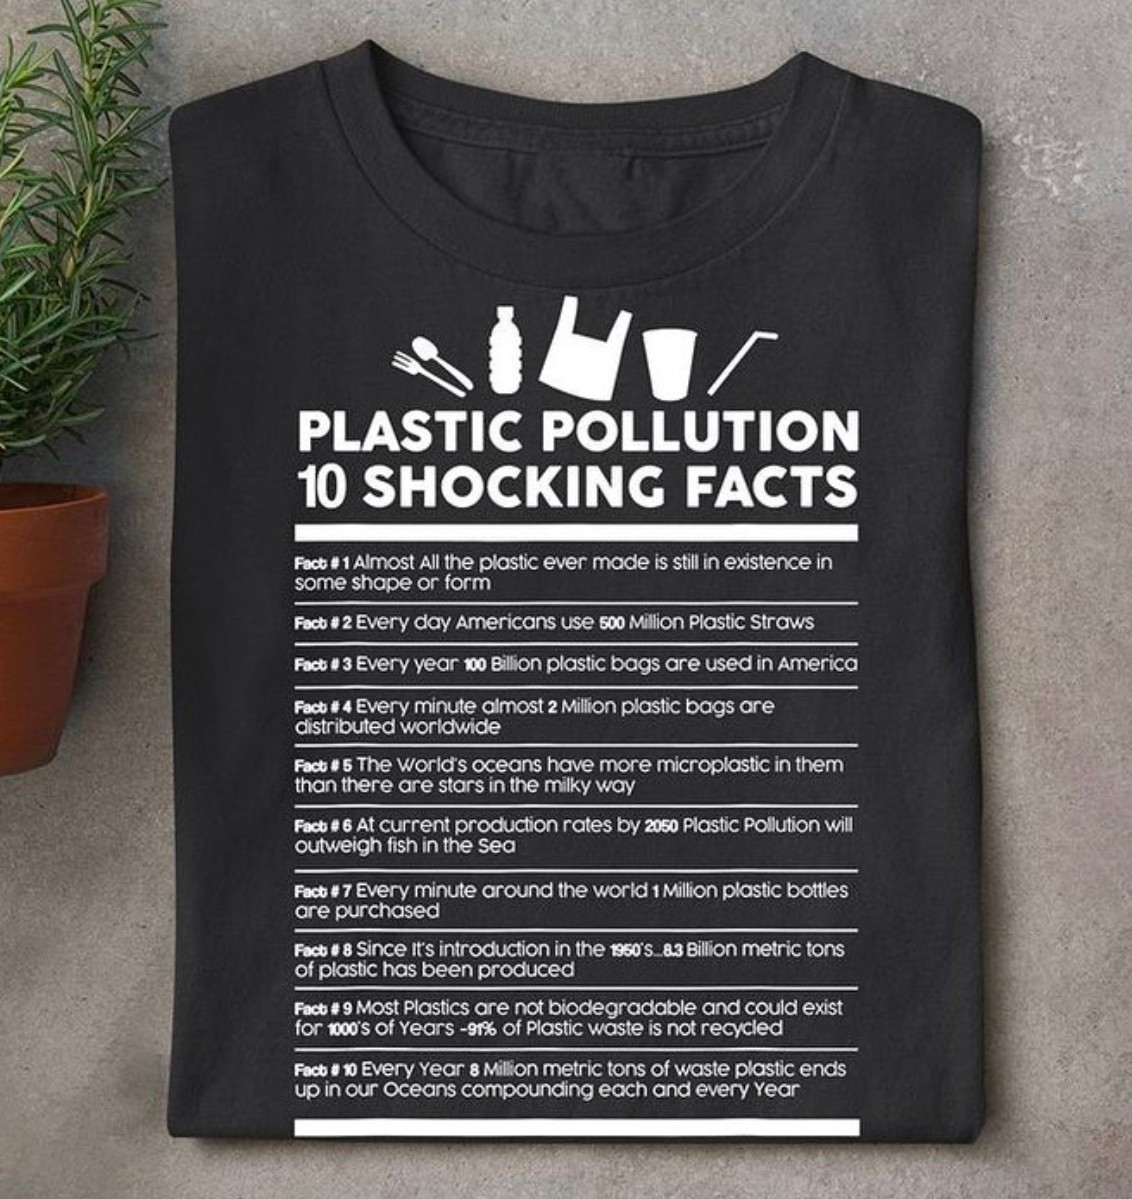 #plasticpollution 10 shocking facts..
sustainme.in

#sustainme #saynotoplastic #singleuseplastic #plasticbag #plasticwaste #plasticpollution #plasticcover #plastics
#Sustainability #sustainable
#deprem #WWEChamber #WPL2024 #INDvENG #SpiderMan2 #winpw #INDvENG #plastic